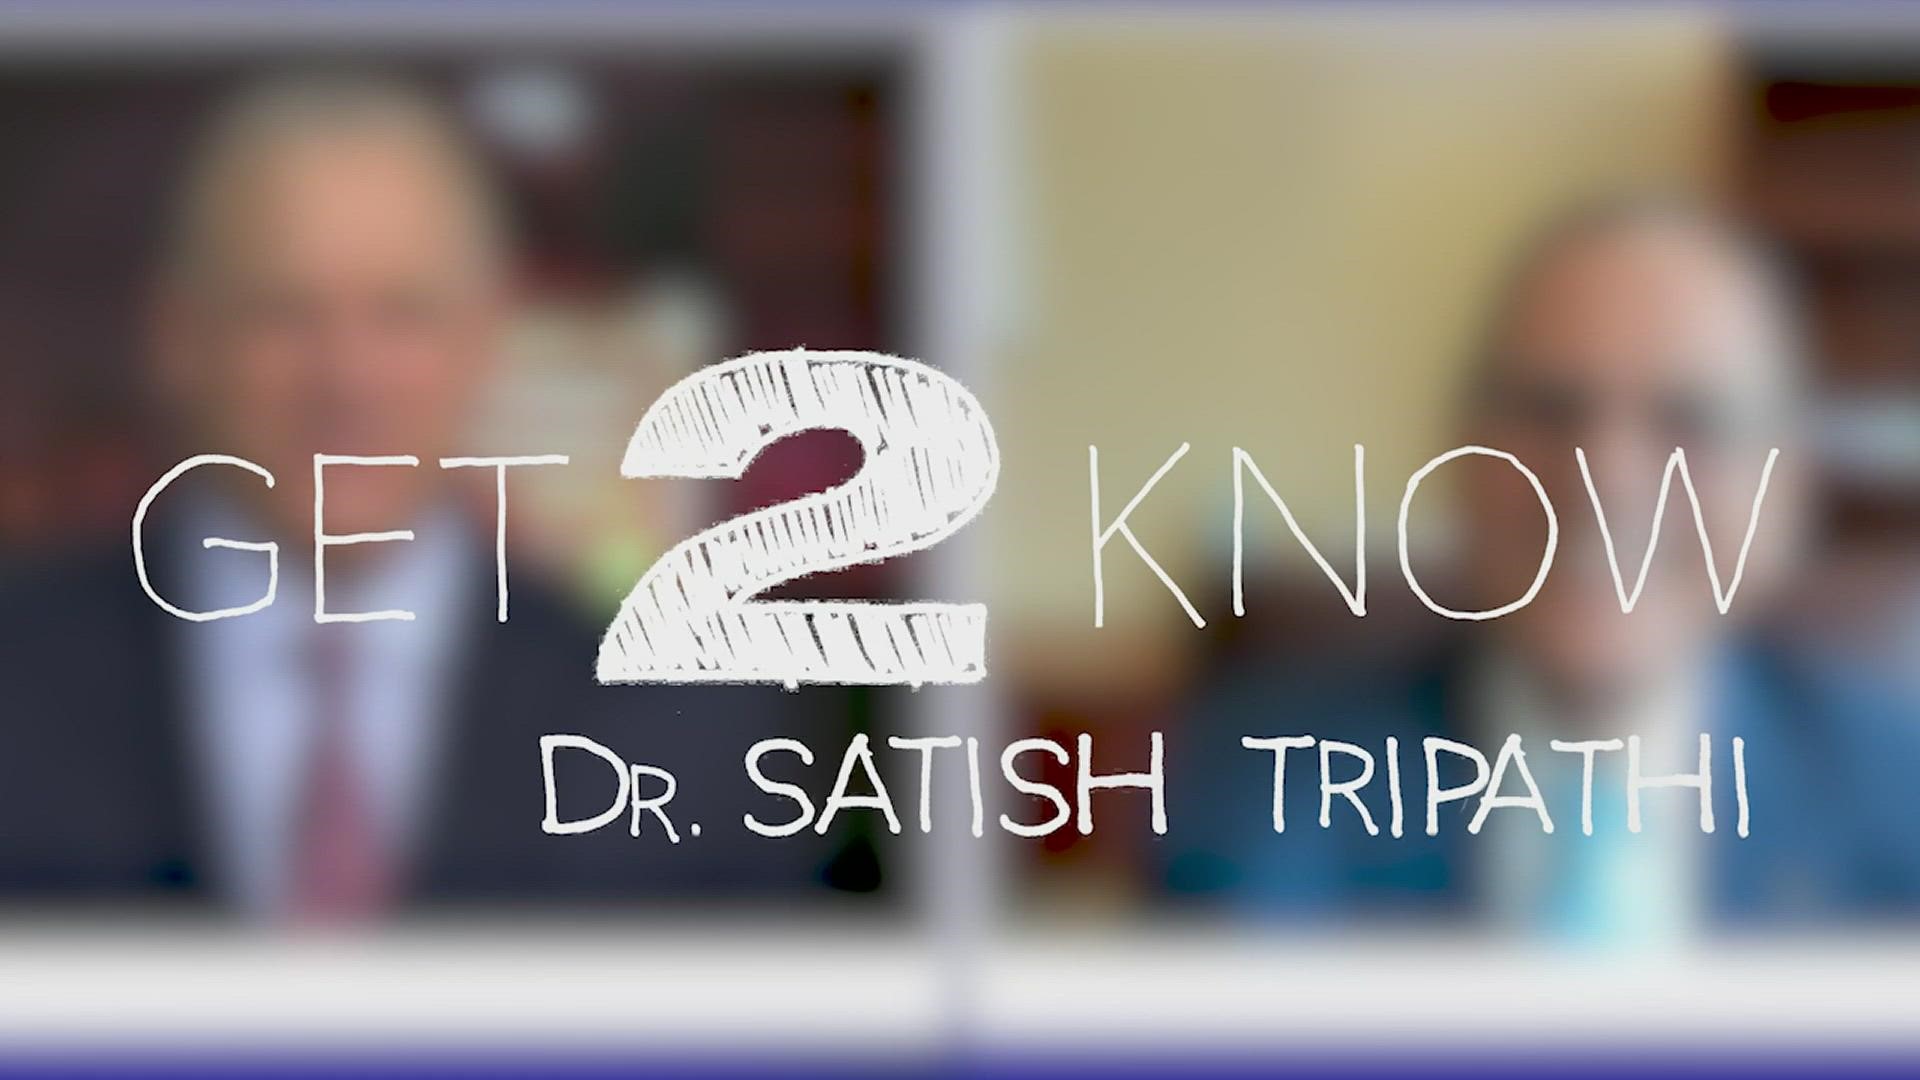 Get 2 Know Dr. Satish Tripathi: University at Buffalo President, with Scott Levin.